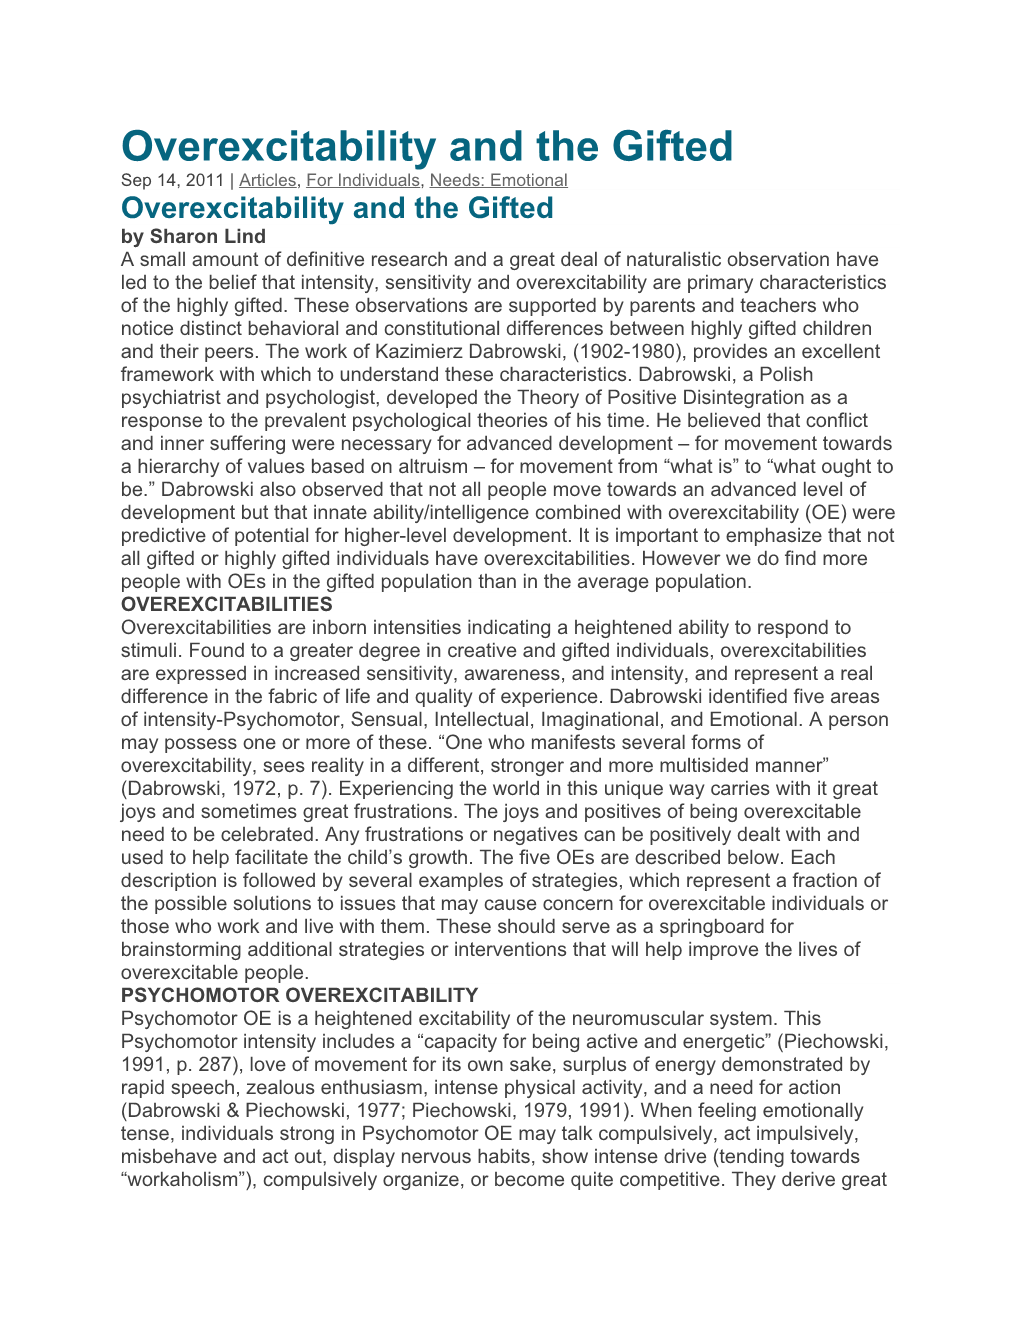 Overexcitability and the Gifted